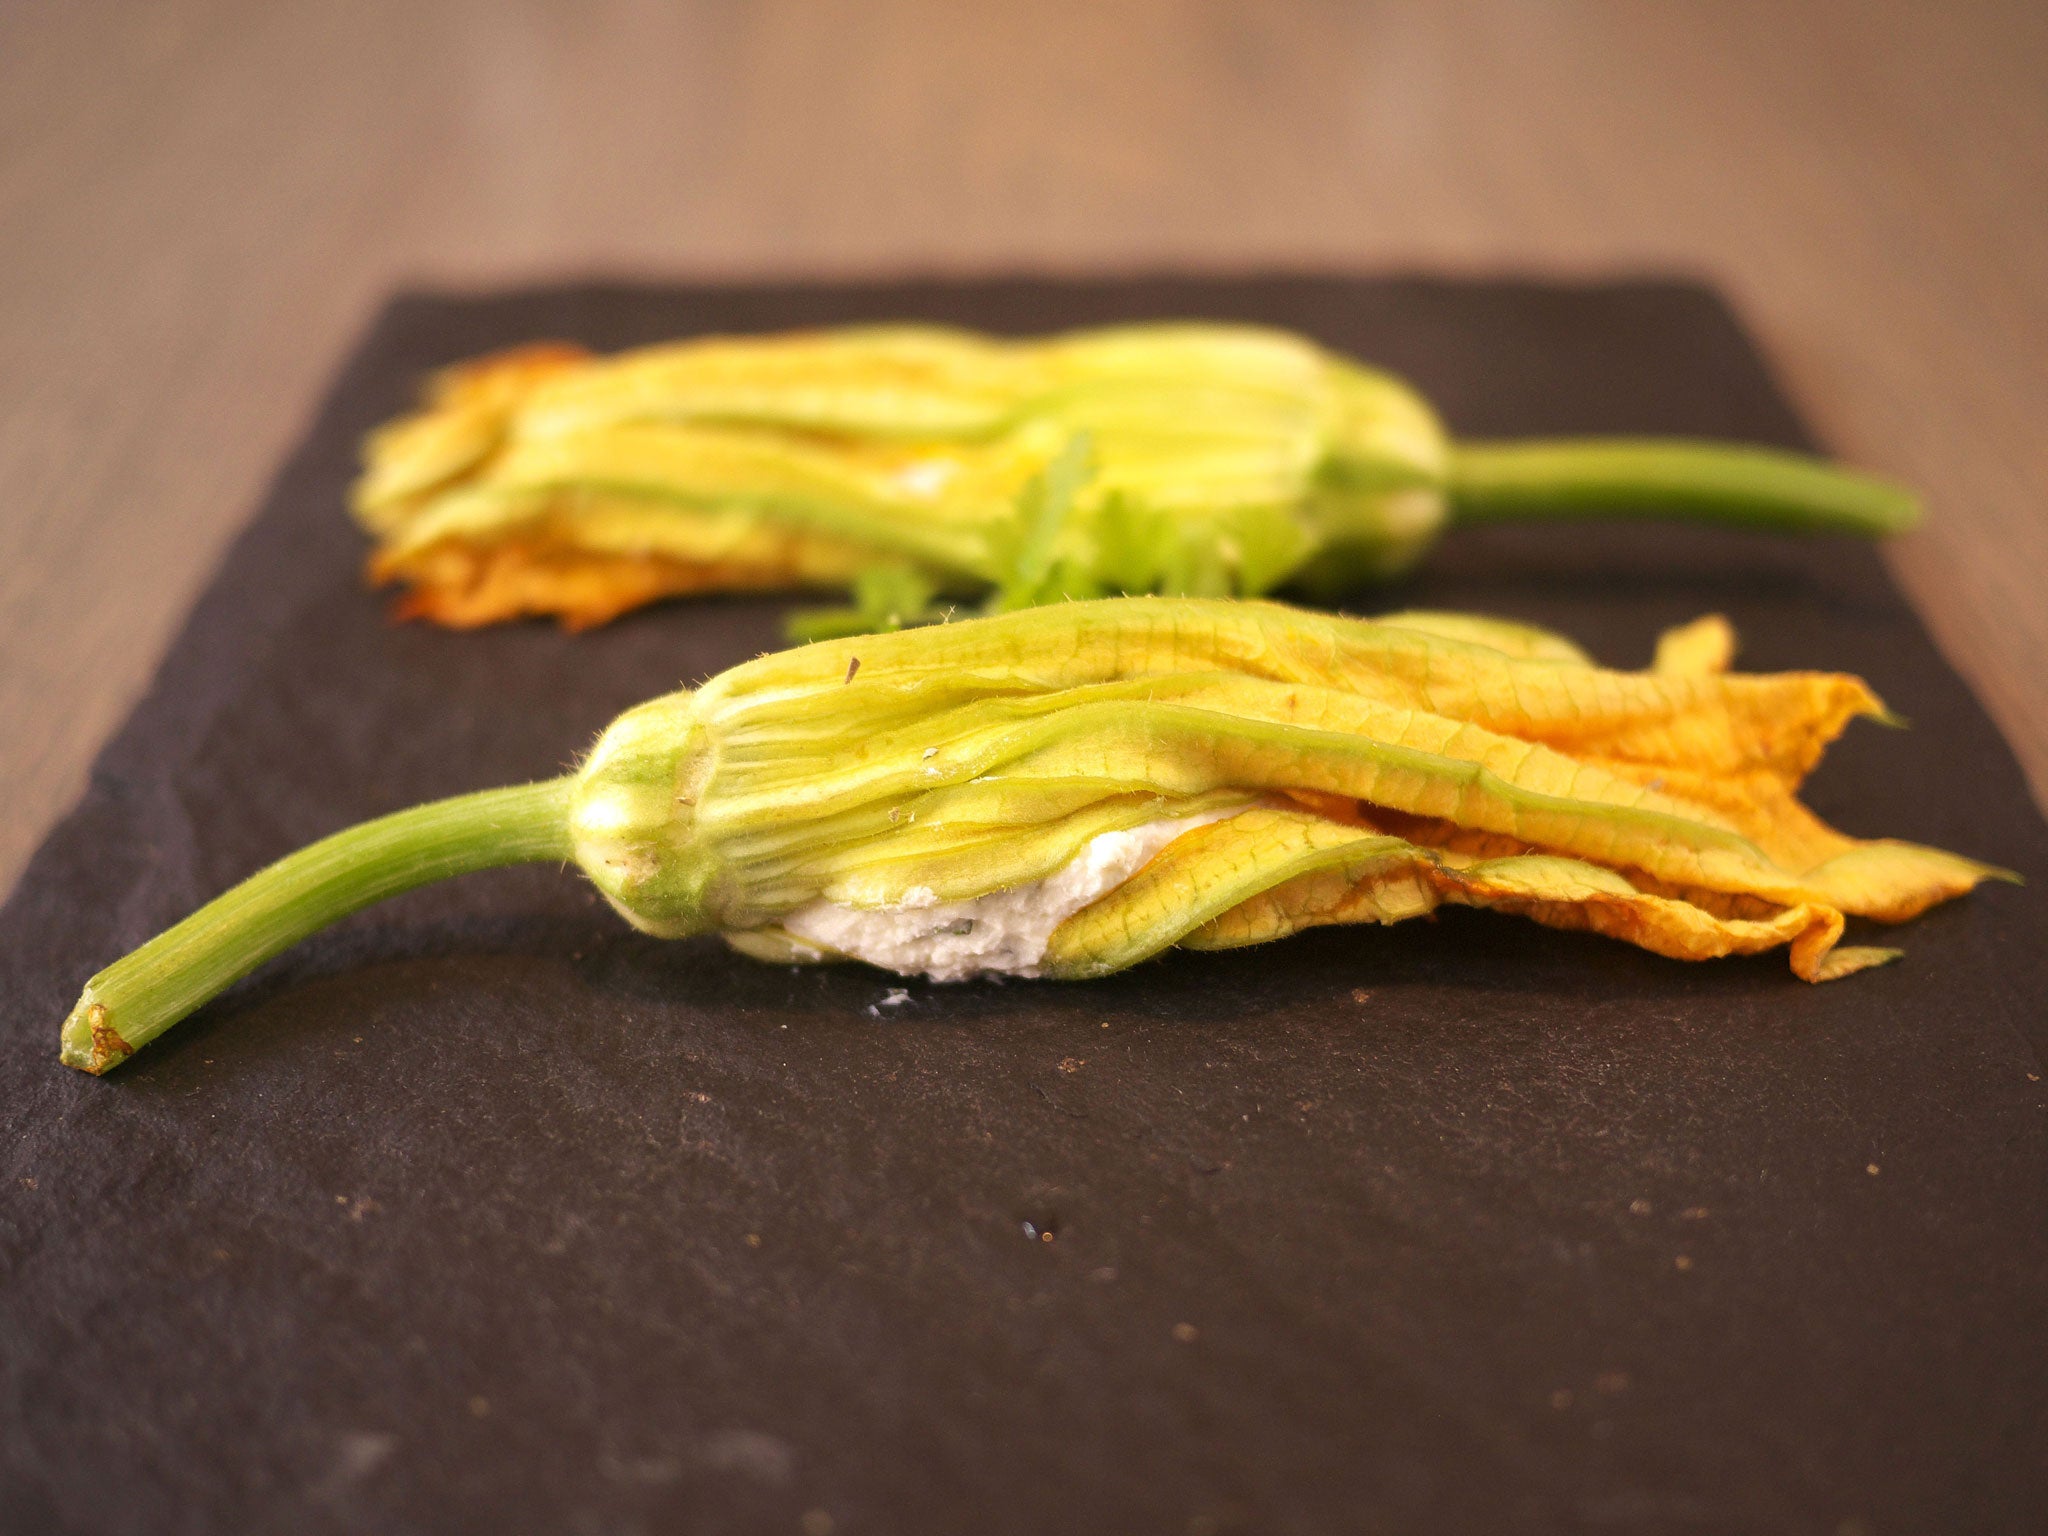 Courgette (or zucchini) flowers